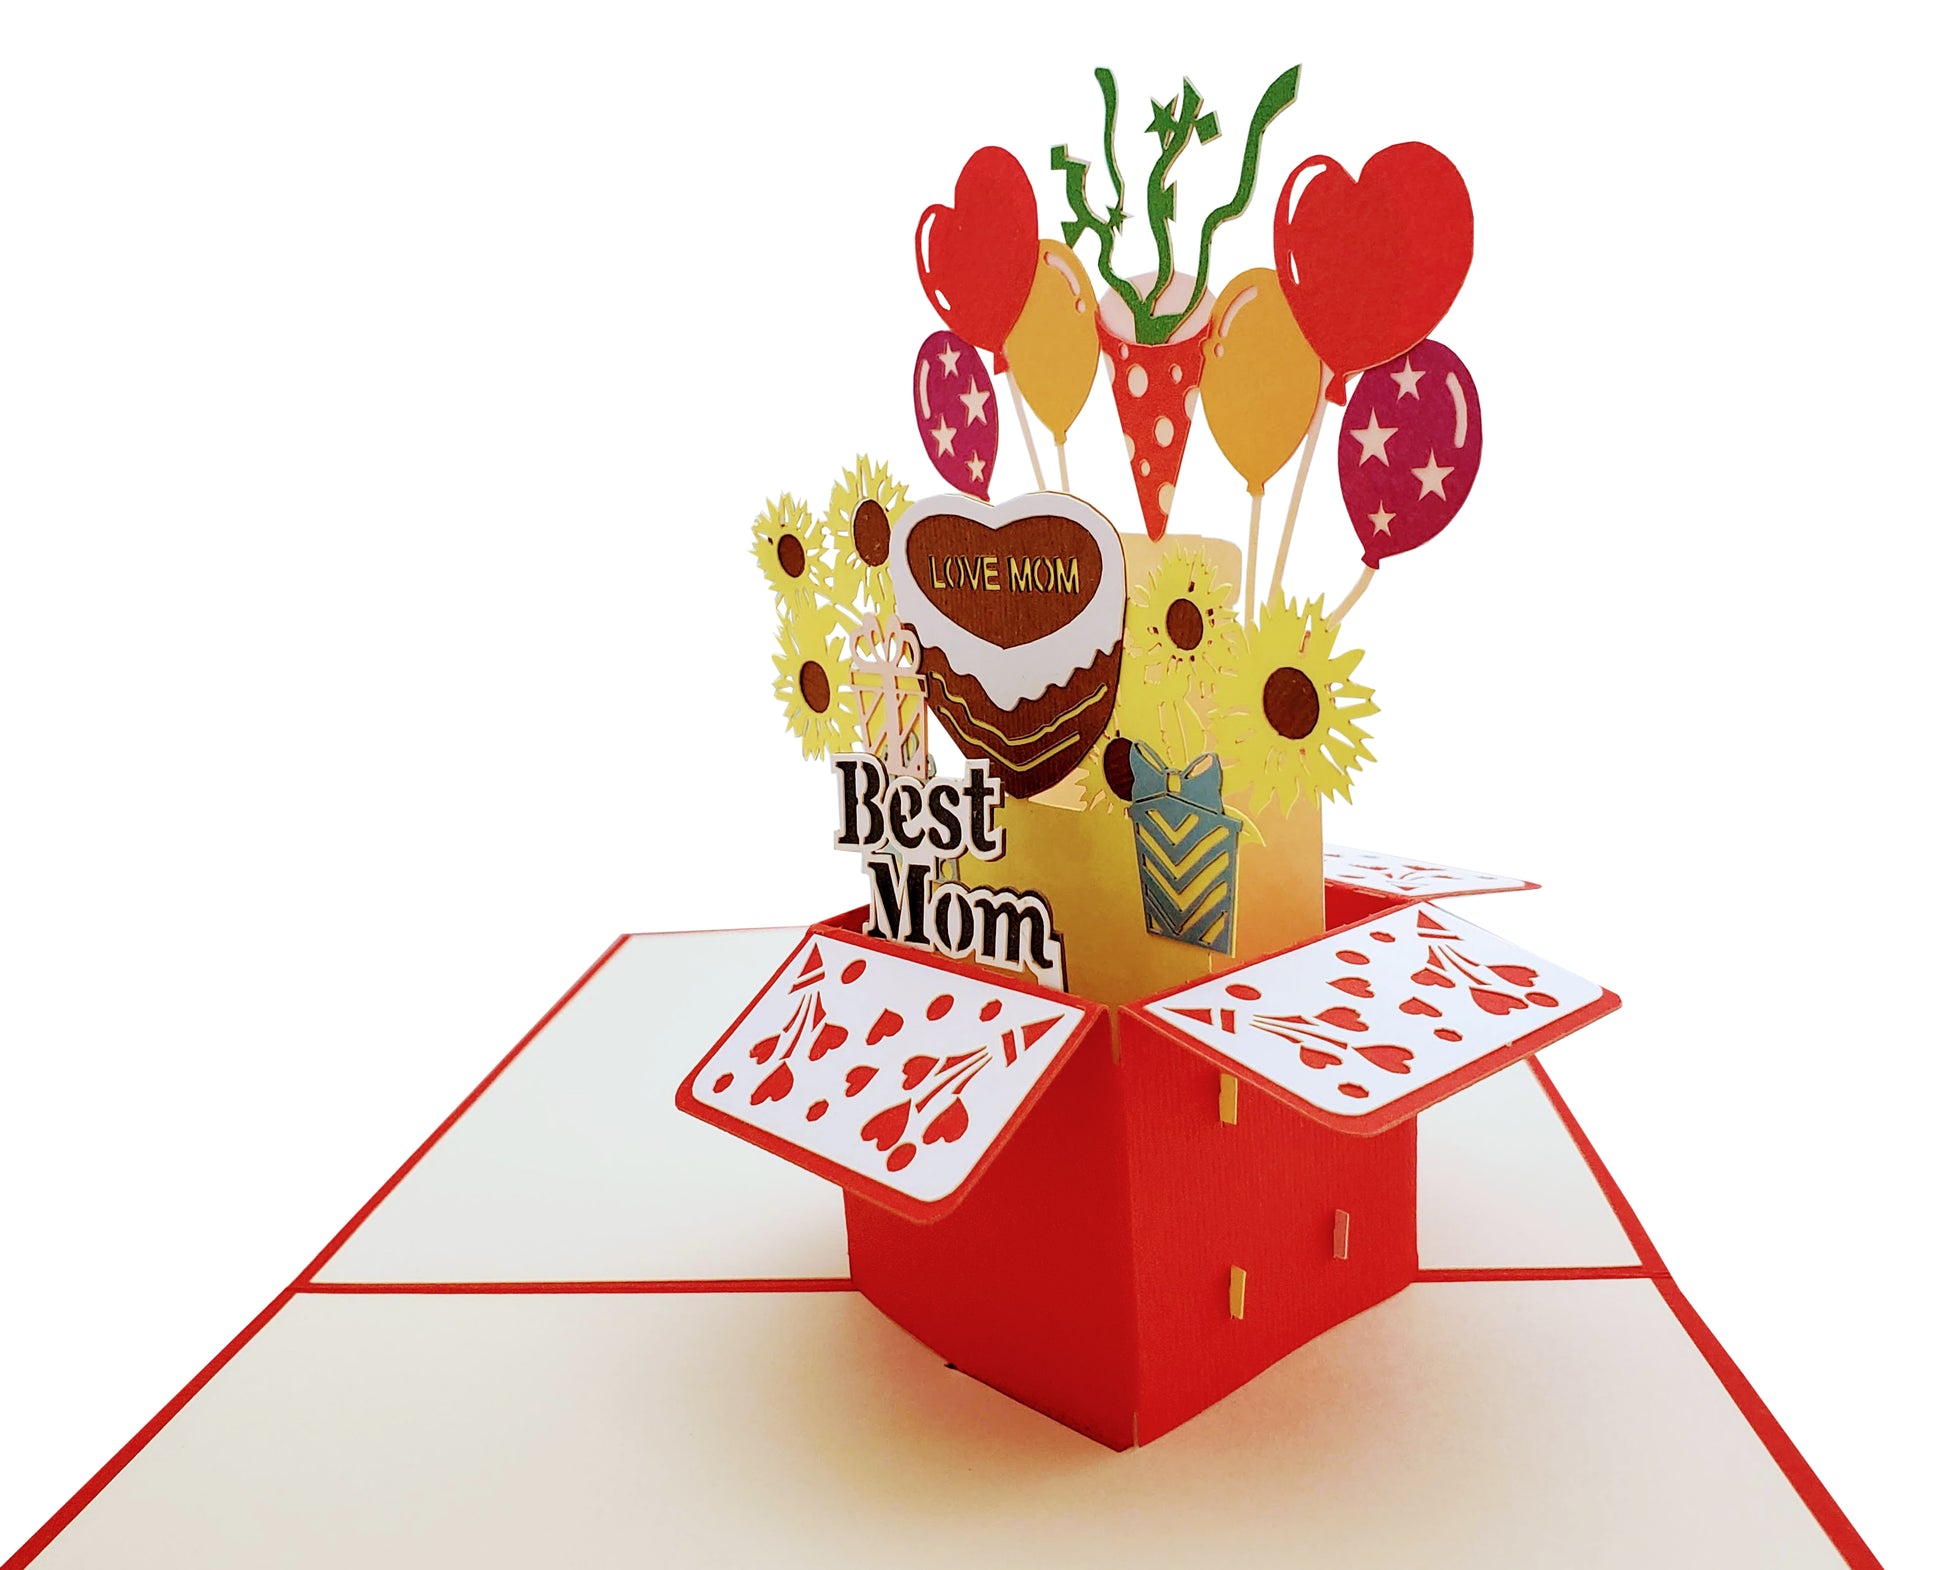 Best Mom Gift Box 3D Pop Up Greeting Card - best deal - Love - Mother's Day - new arrival - Special - iGifts And Cards